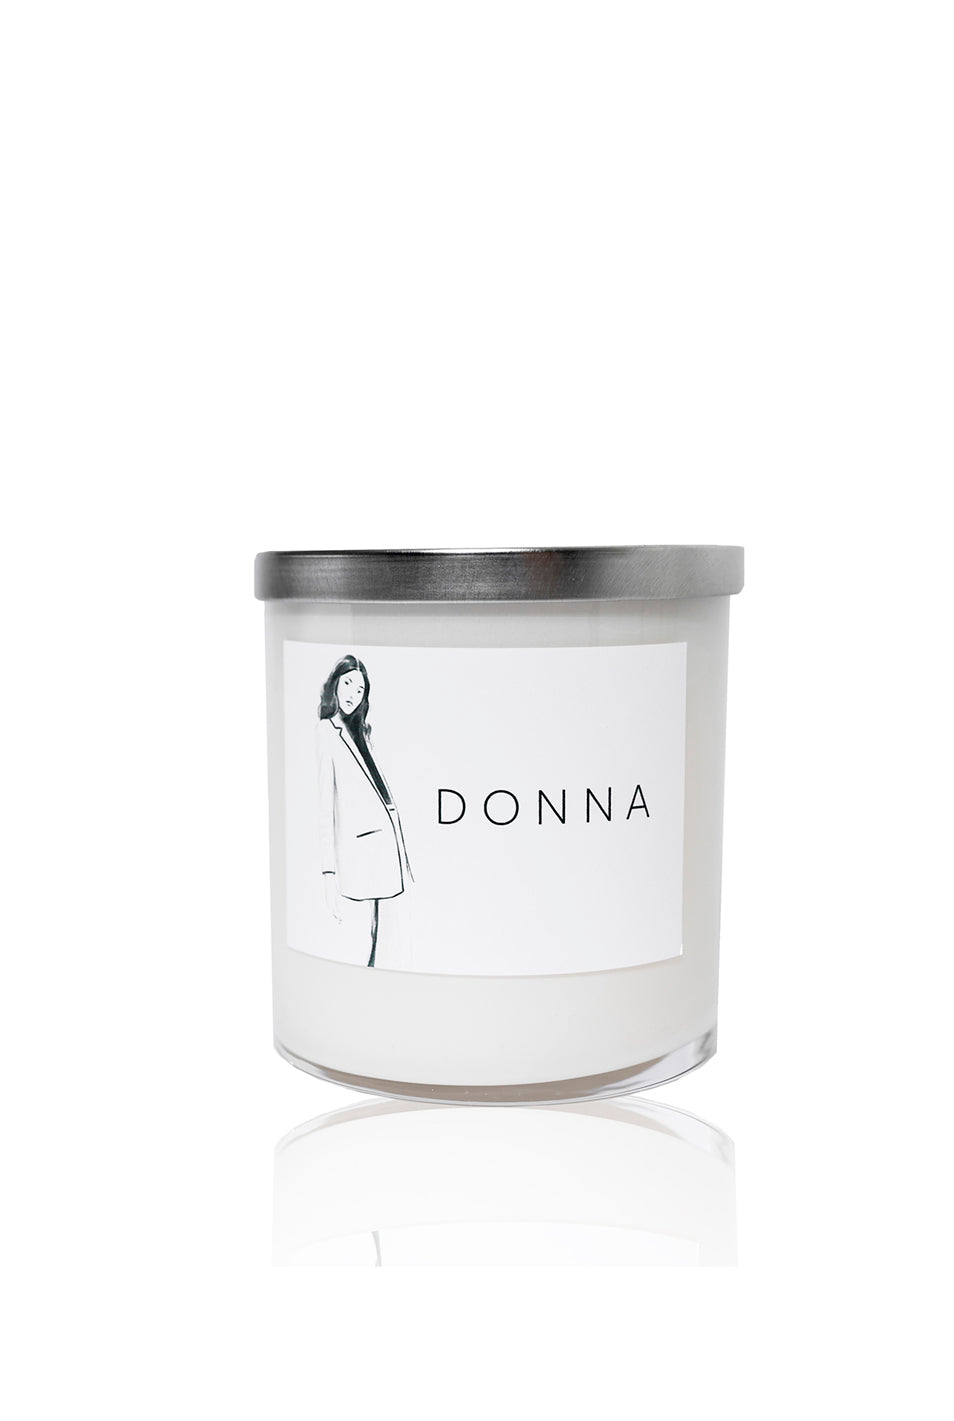 The "Donna" Candle - 2s-twoways